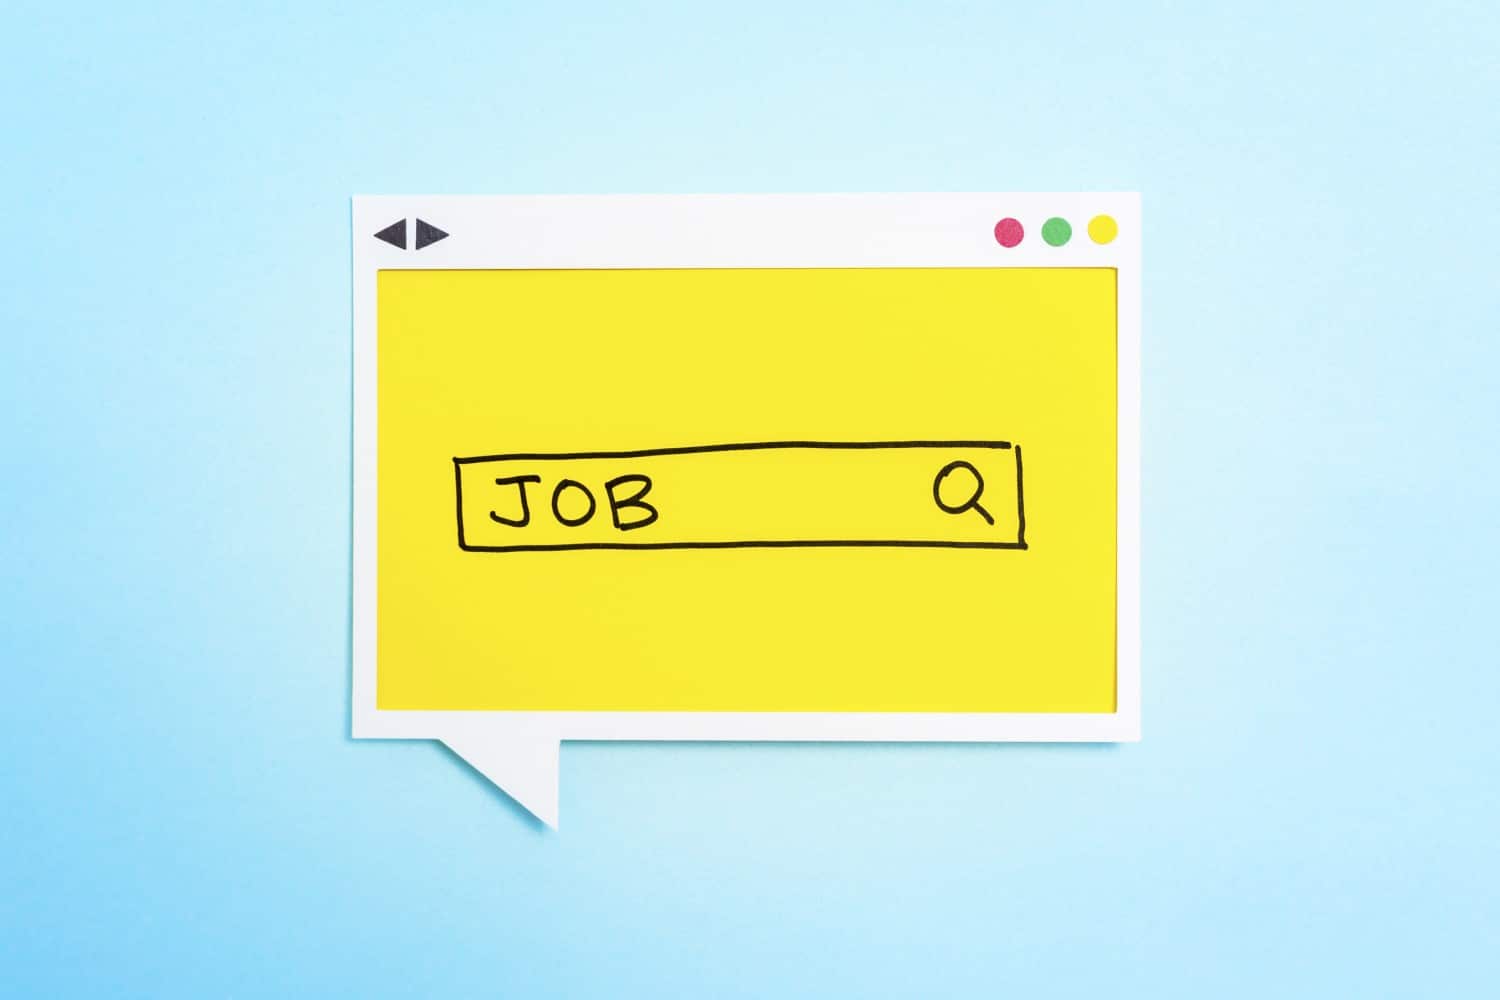 Job in search bar Graphic